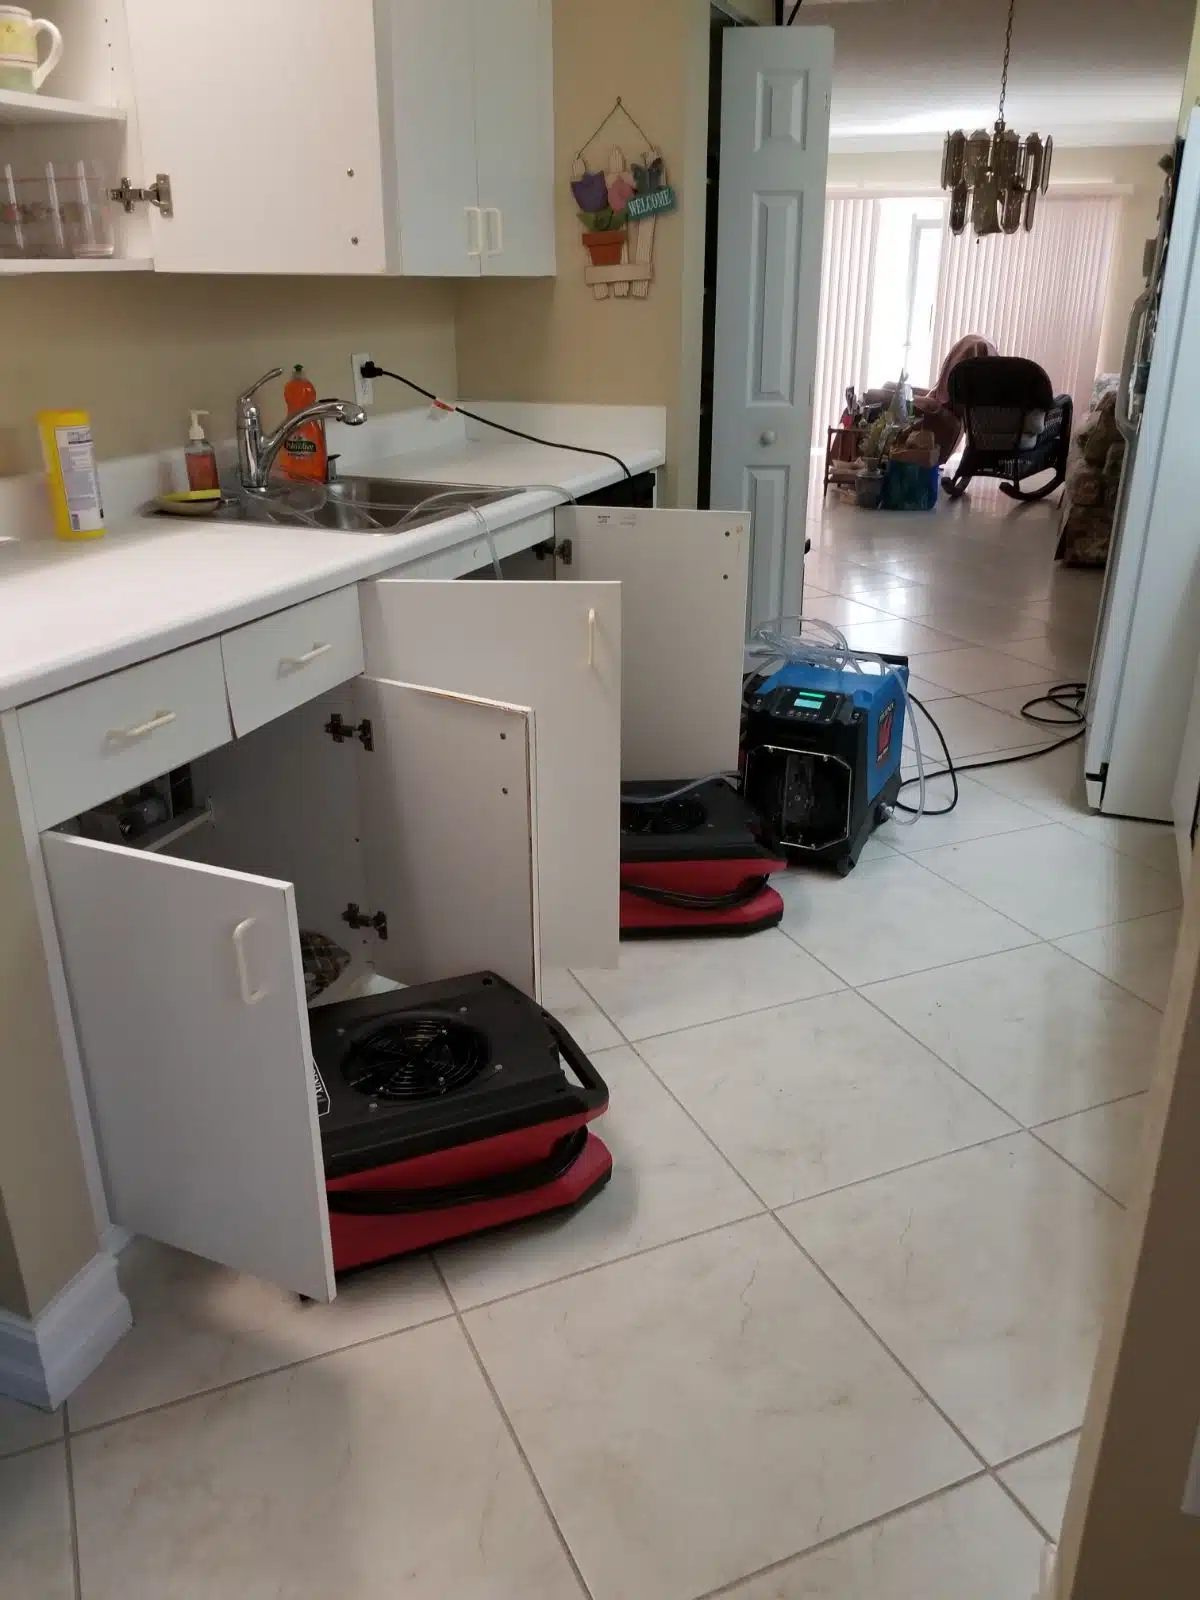 Structural drying kitchen cabinets after pipe burst